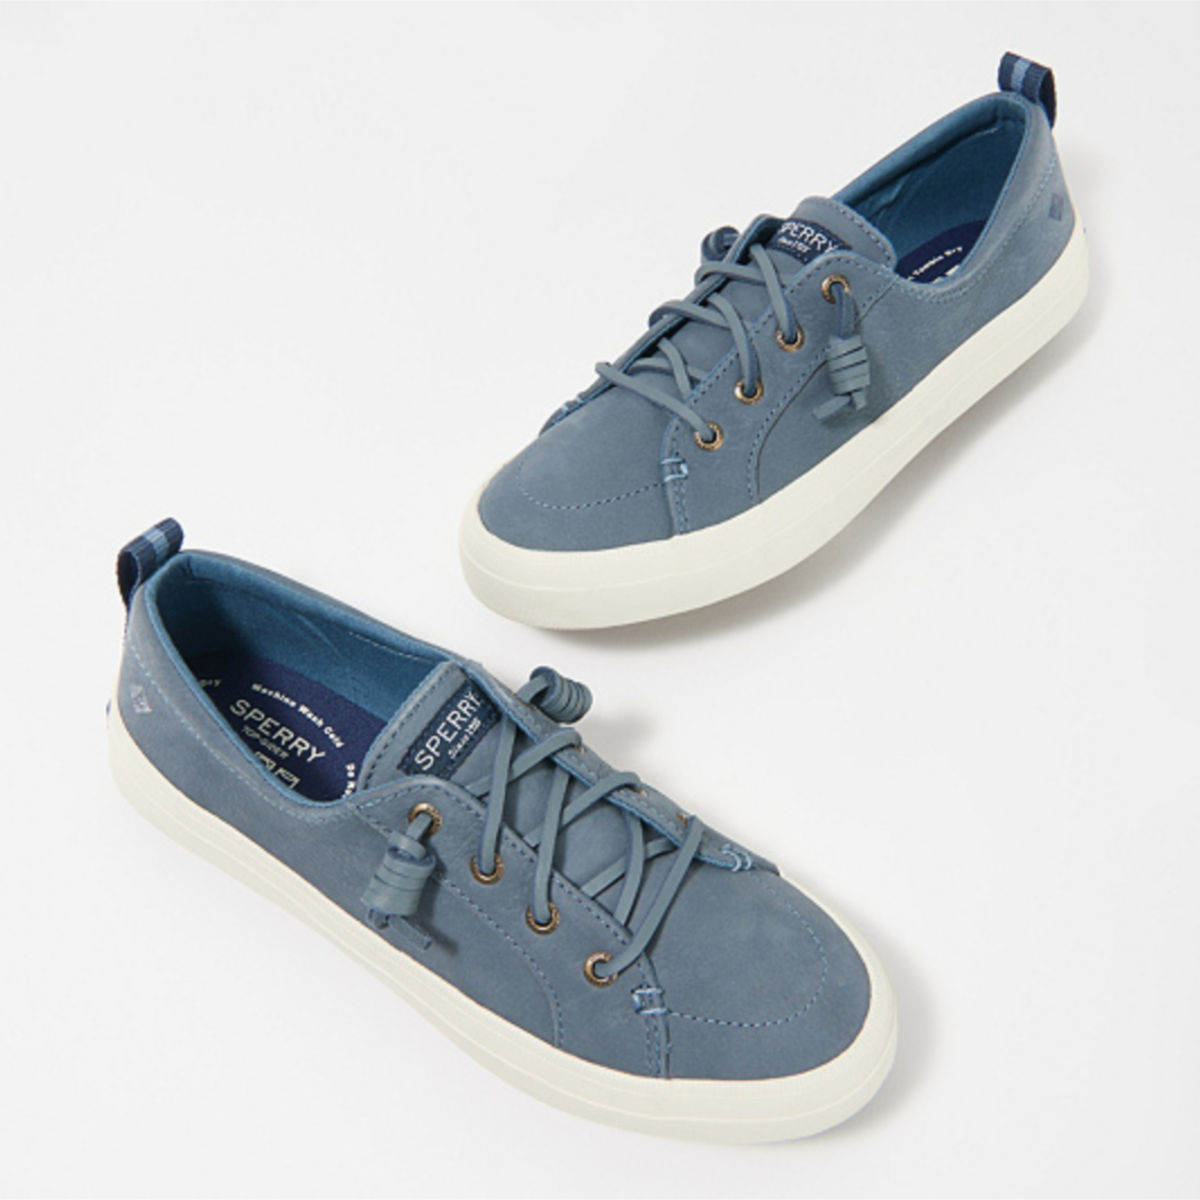 Sperry Crest Vibe Washable Leather Slip-On Sneakers